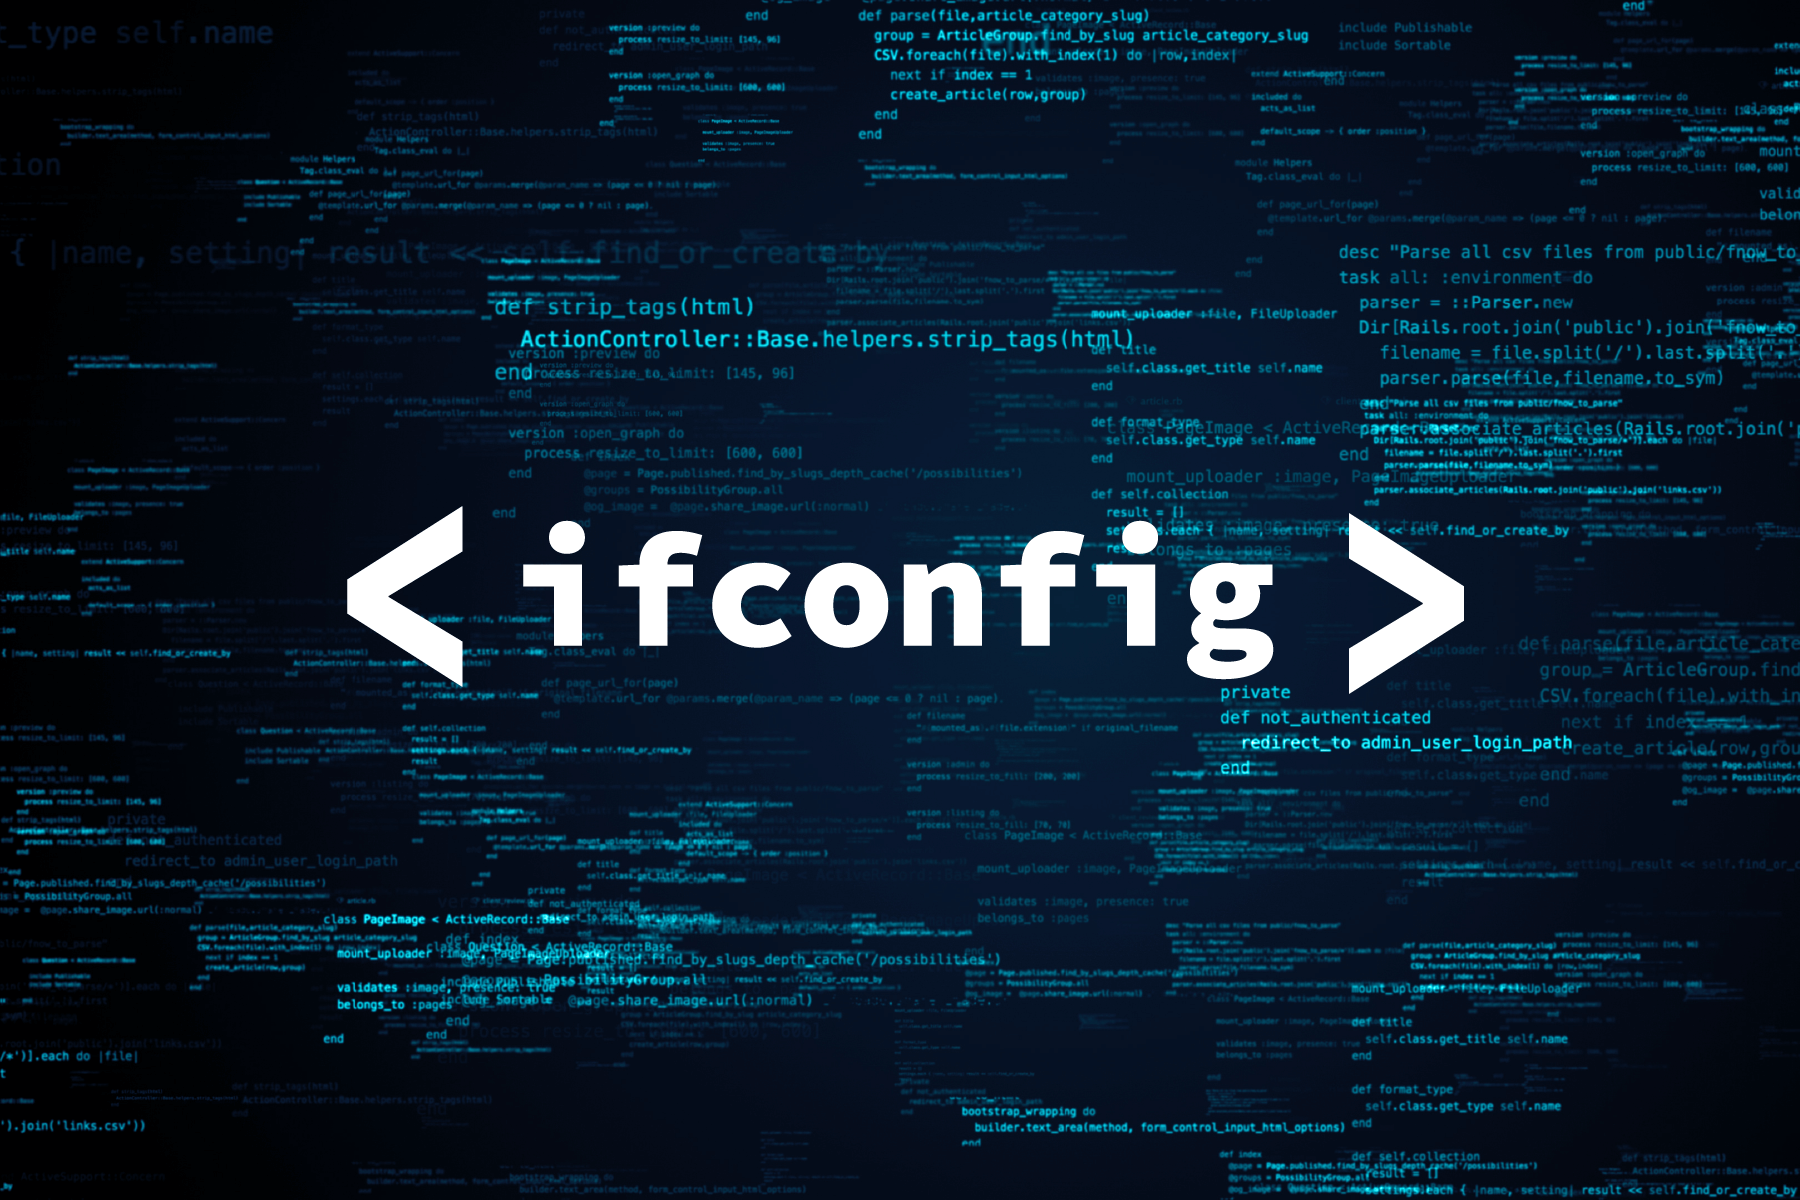 Linux_ifconfig